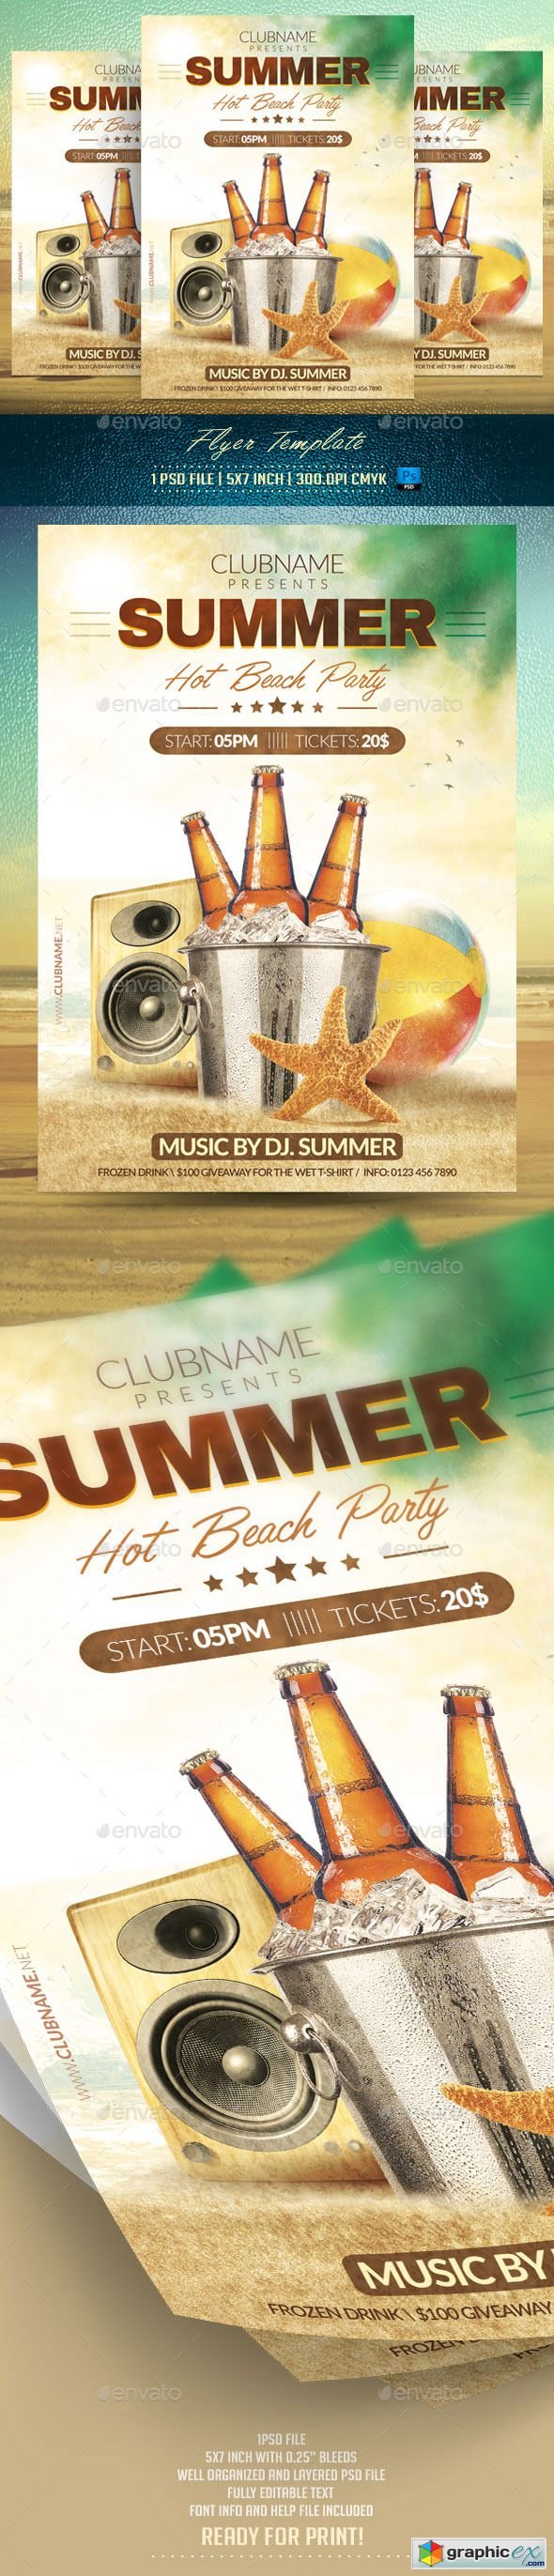 Summer Party Flyer Template 11890494